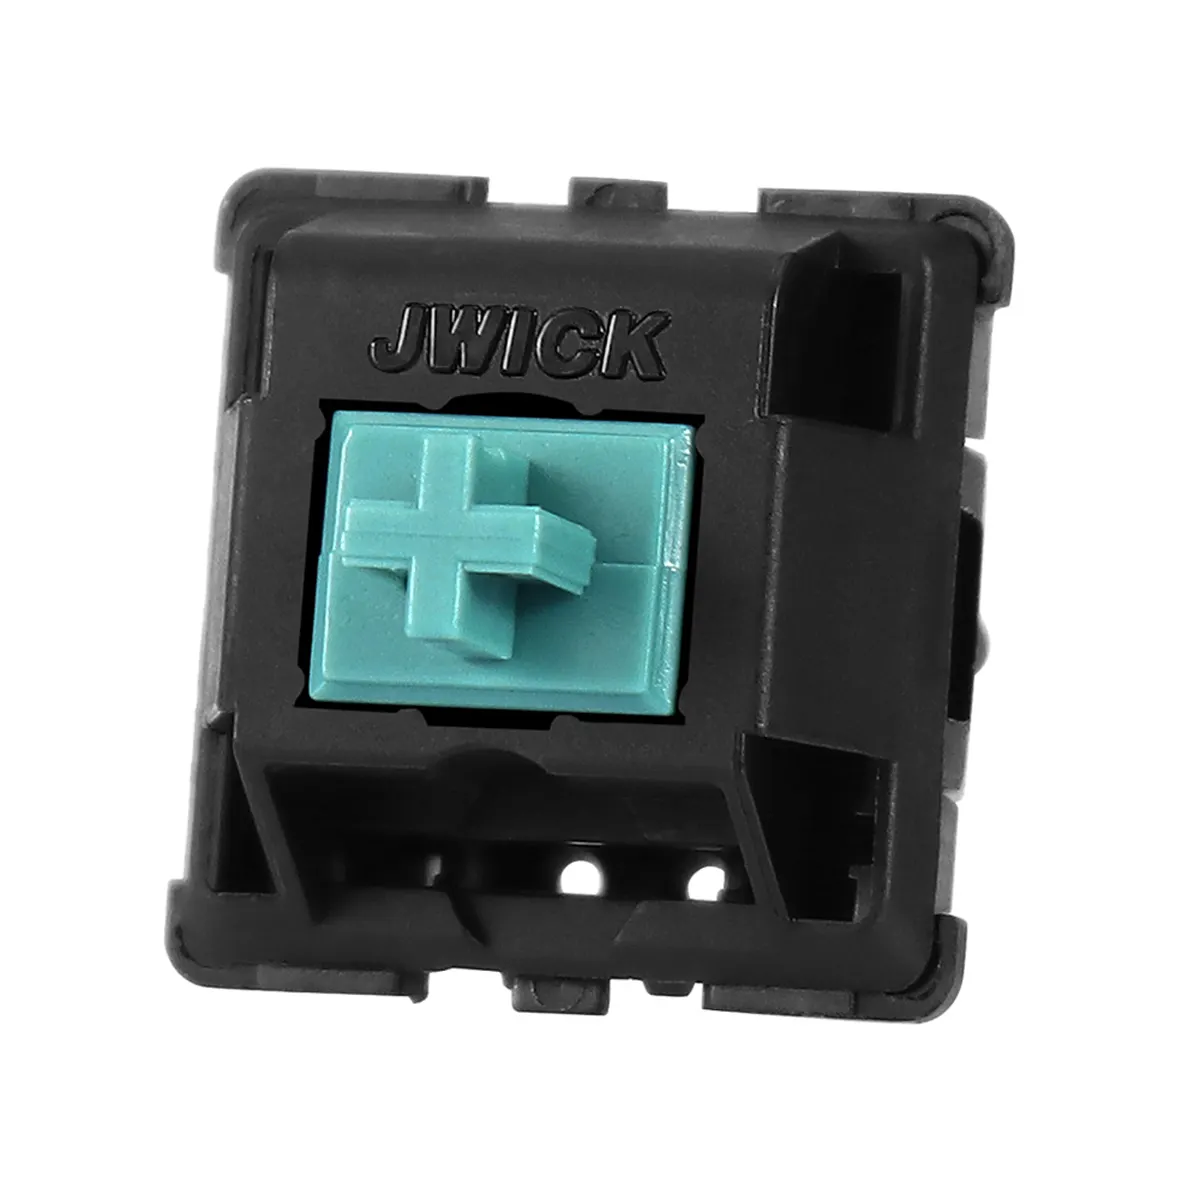 JWICK Black T1 Tactile Switch 67g with Full Nylon Housing Teal Stem JWK 5 Pins Mechanical Switches for DIY Keyboards